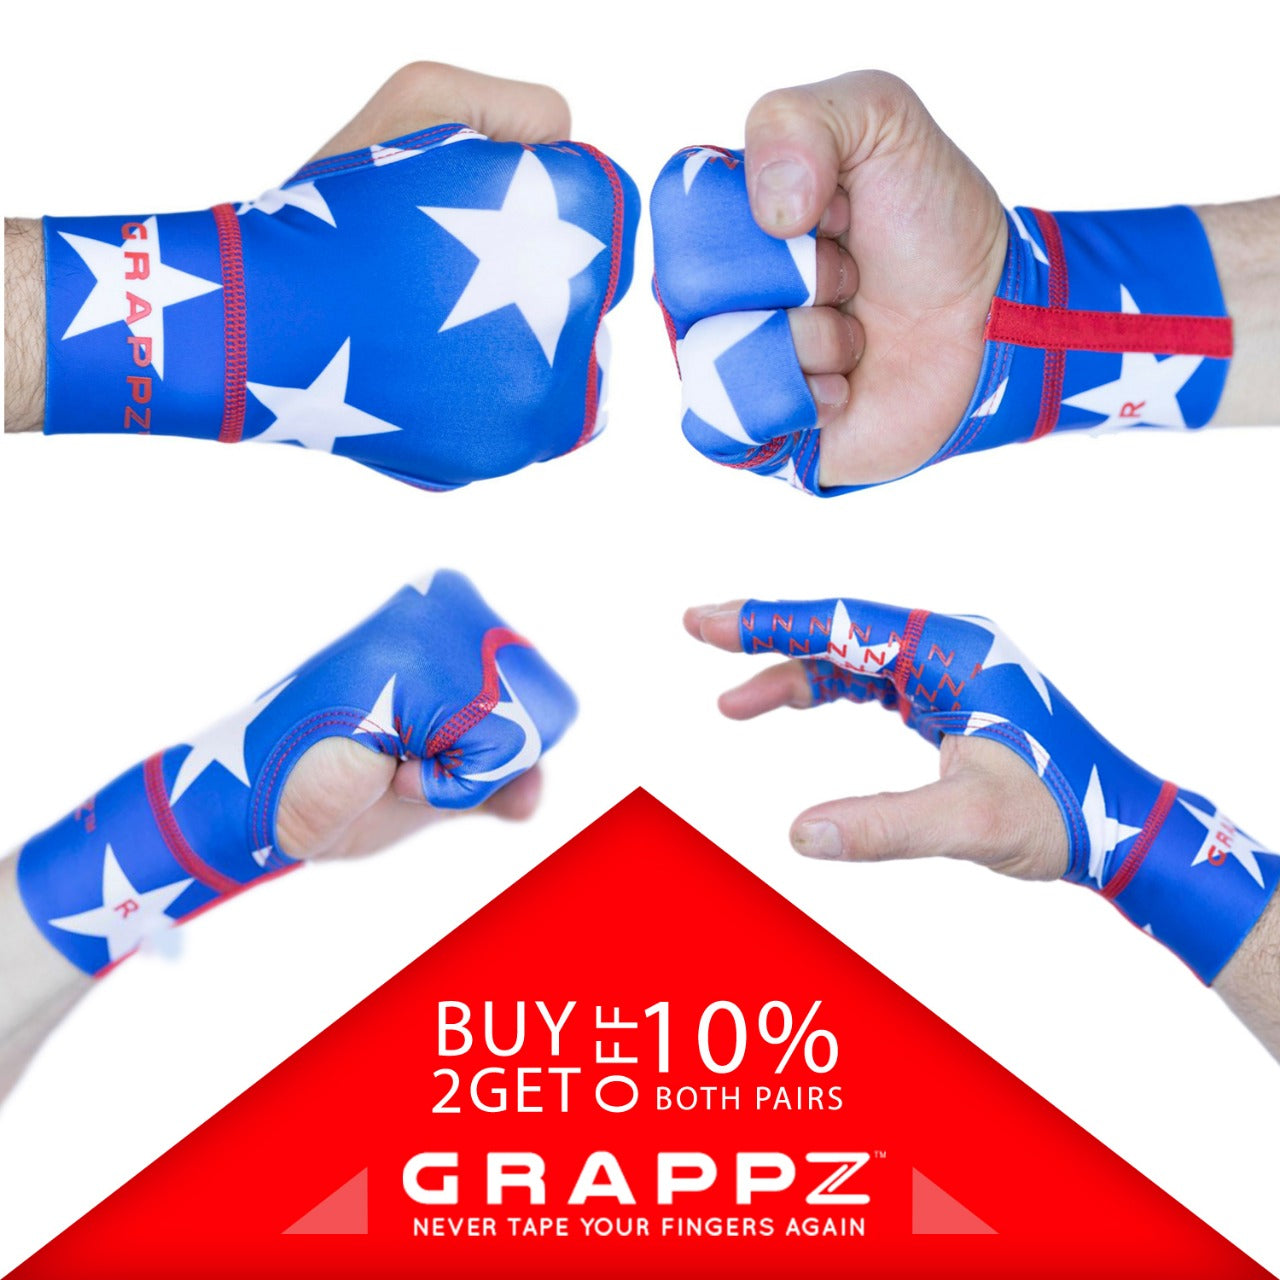 Finger Tape Alternative Splint Athletic Gloves For BJJ / All Sports - Red, White and Blue Grappz